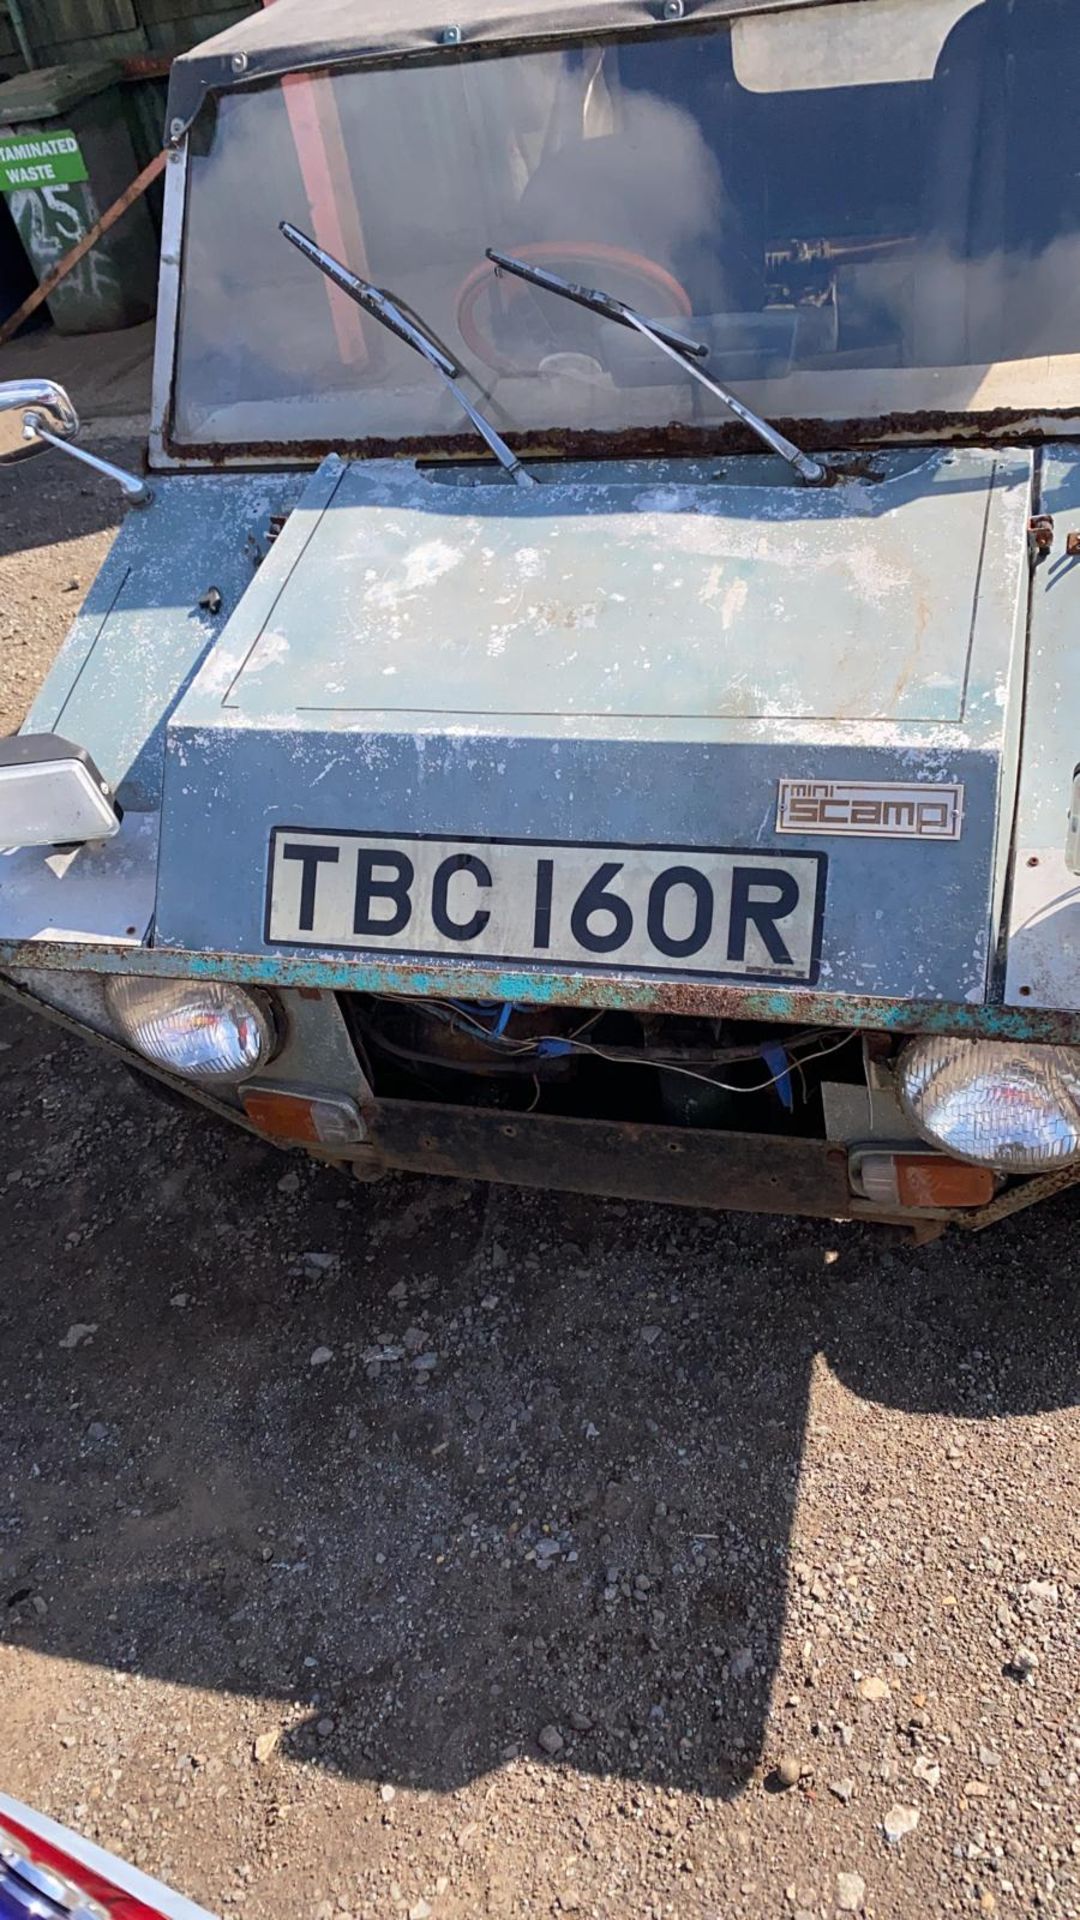 1977 MINISCAMP BUGGY 998CC PETROL SILVER, V5 PRESENT - BARN FIND! - Image 2 of 17